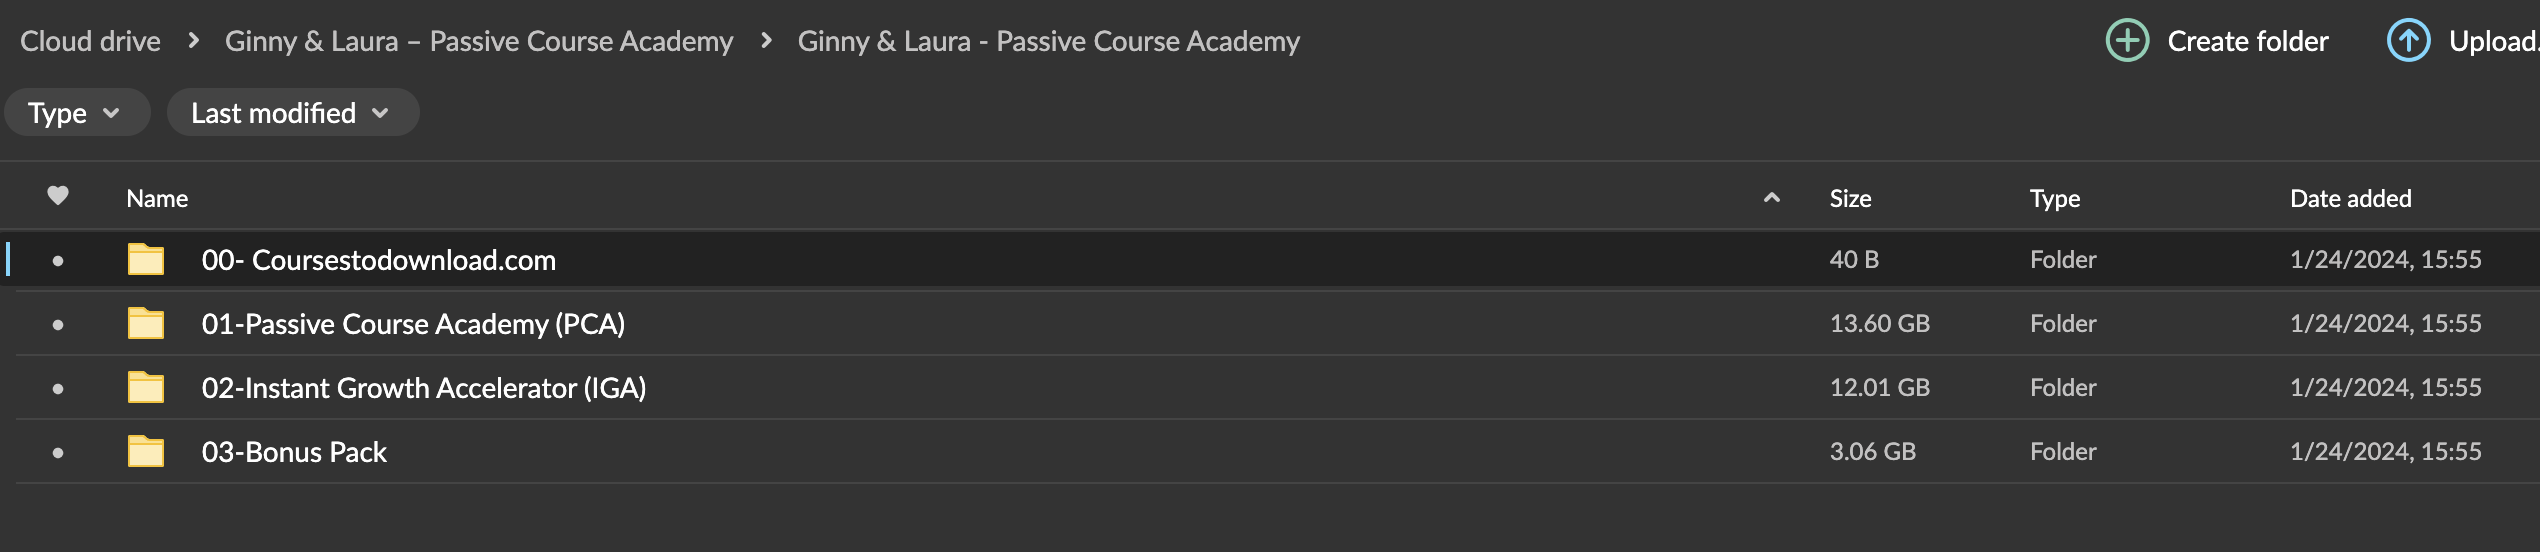 Ginny & Laura – Passive Course Academy Download